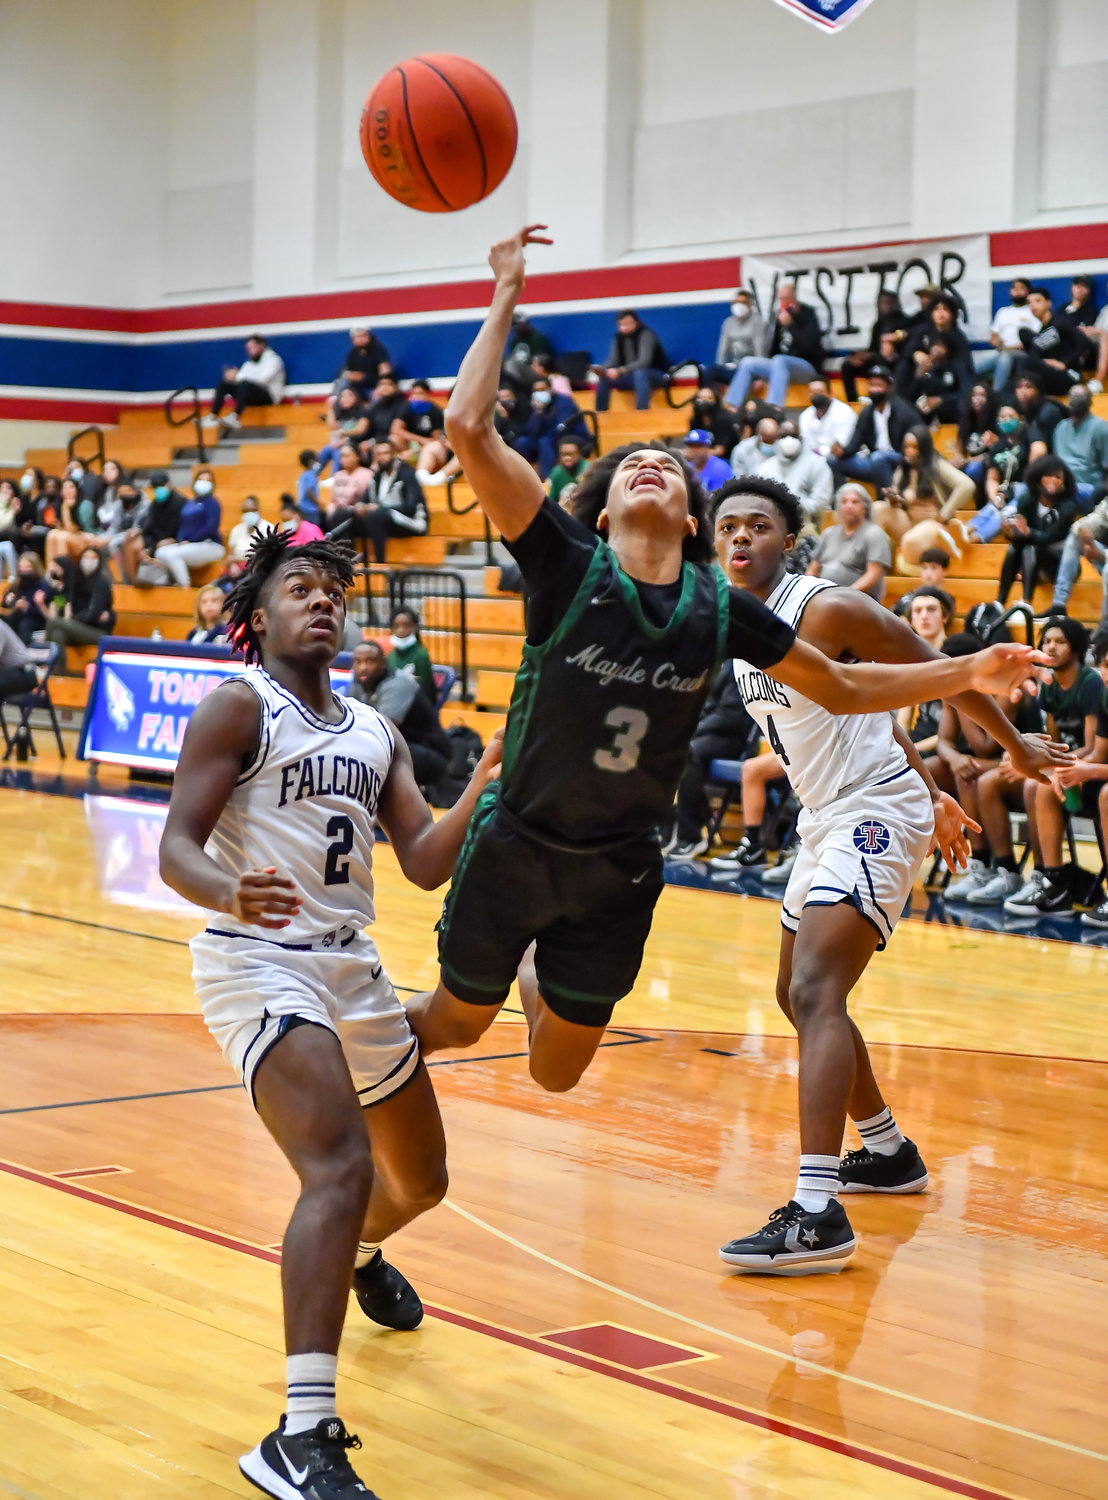 Katy Tx. Jan 14, 2022:   Mayde Creeks Christian Jones #3 goes up for the shot during the Tompkins vs Mayde Creek game.  (Photo by Mark Goodman / Katy Times)